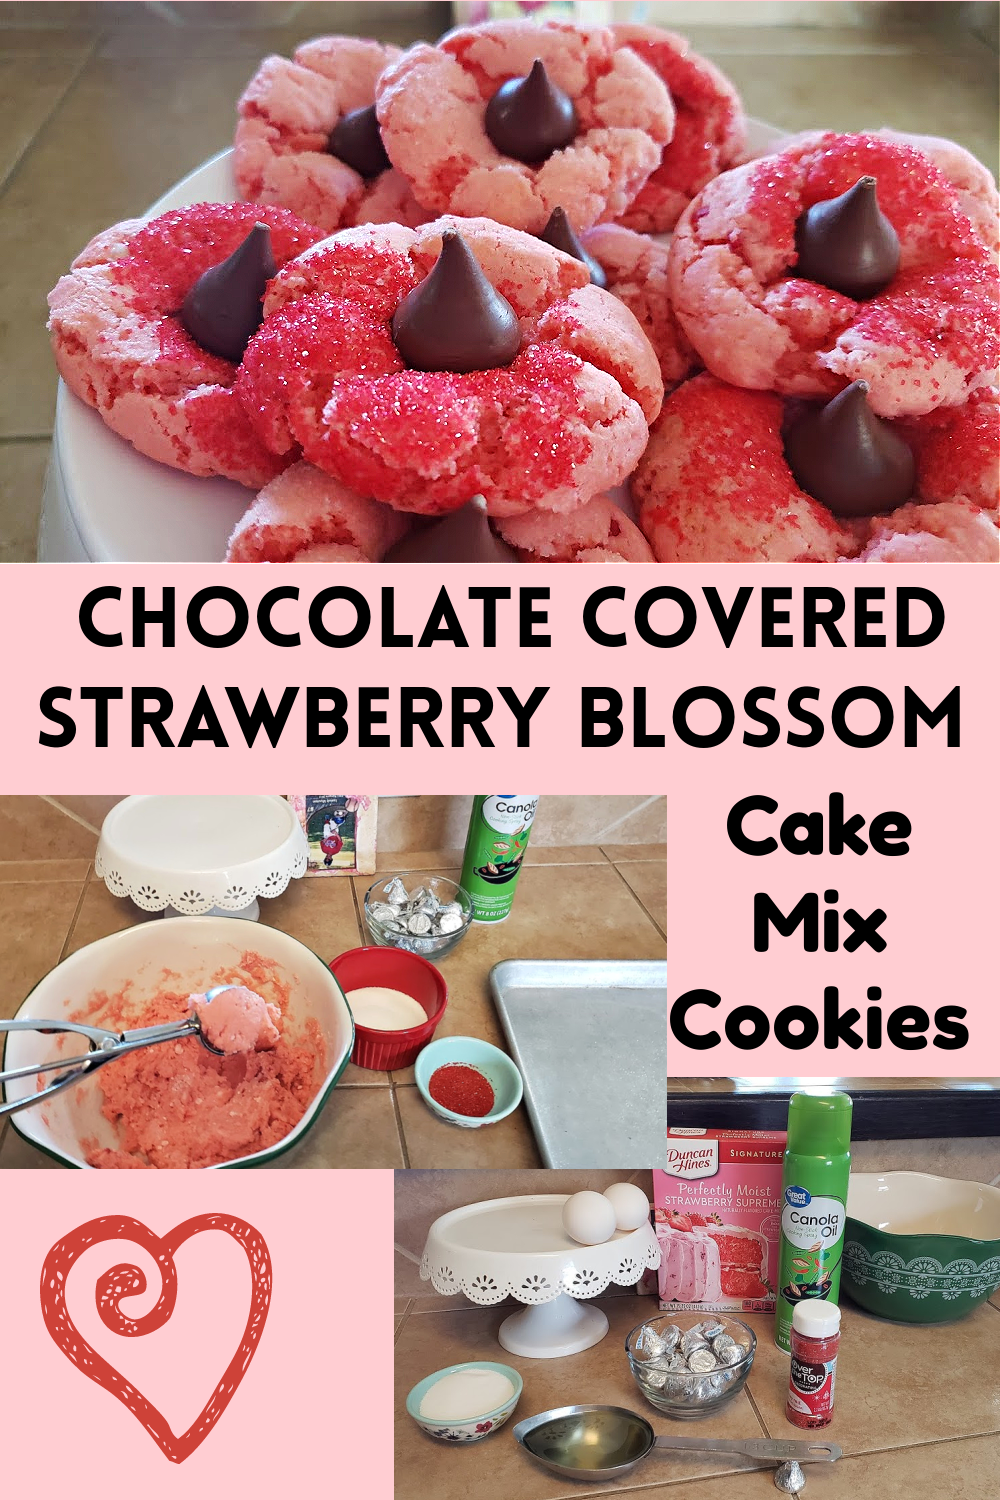 Chocolate Covered Strawberry Blossom Cake Mix Cookies